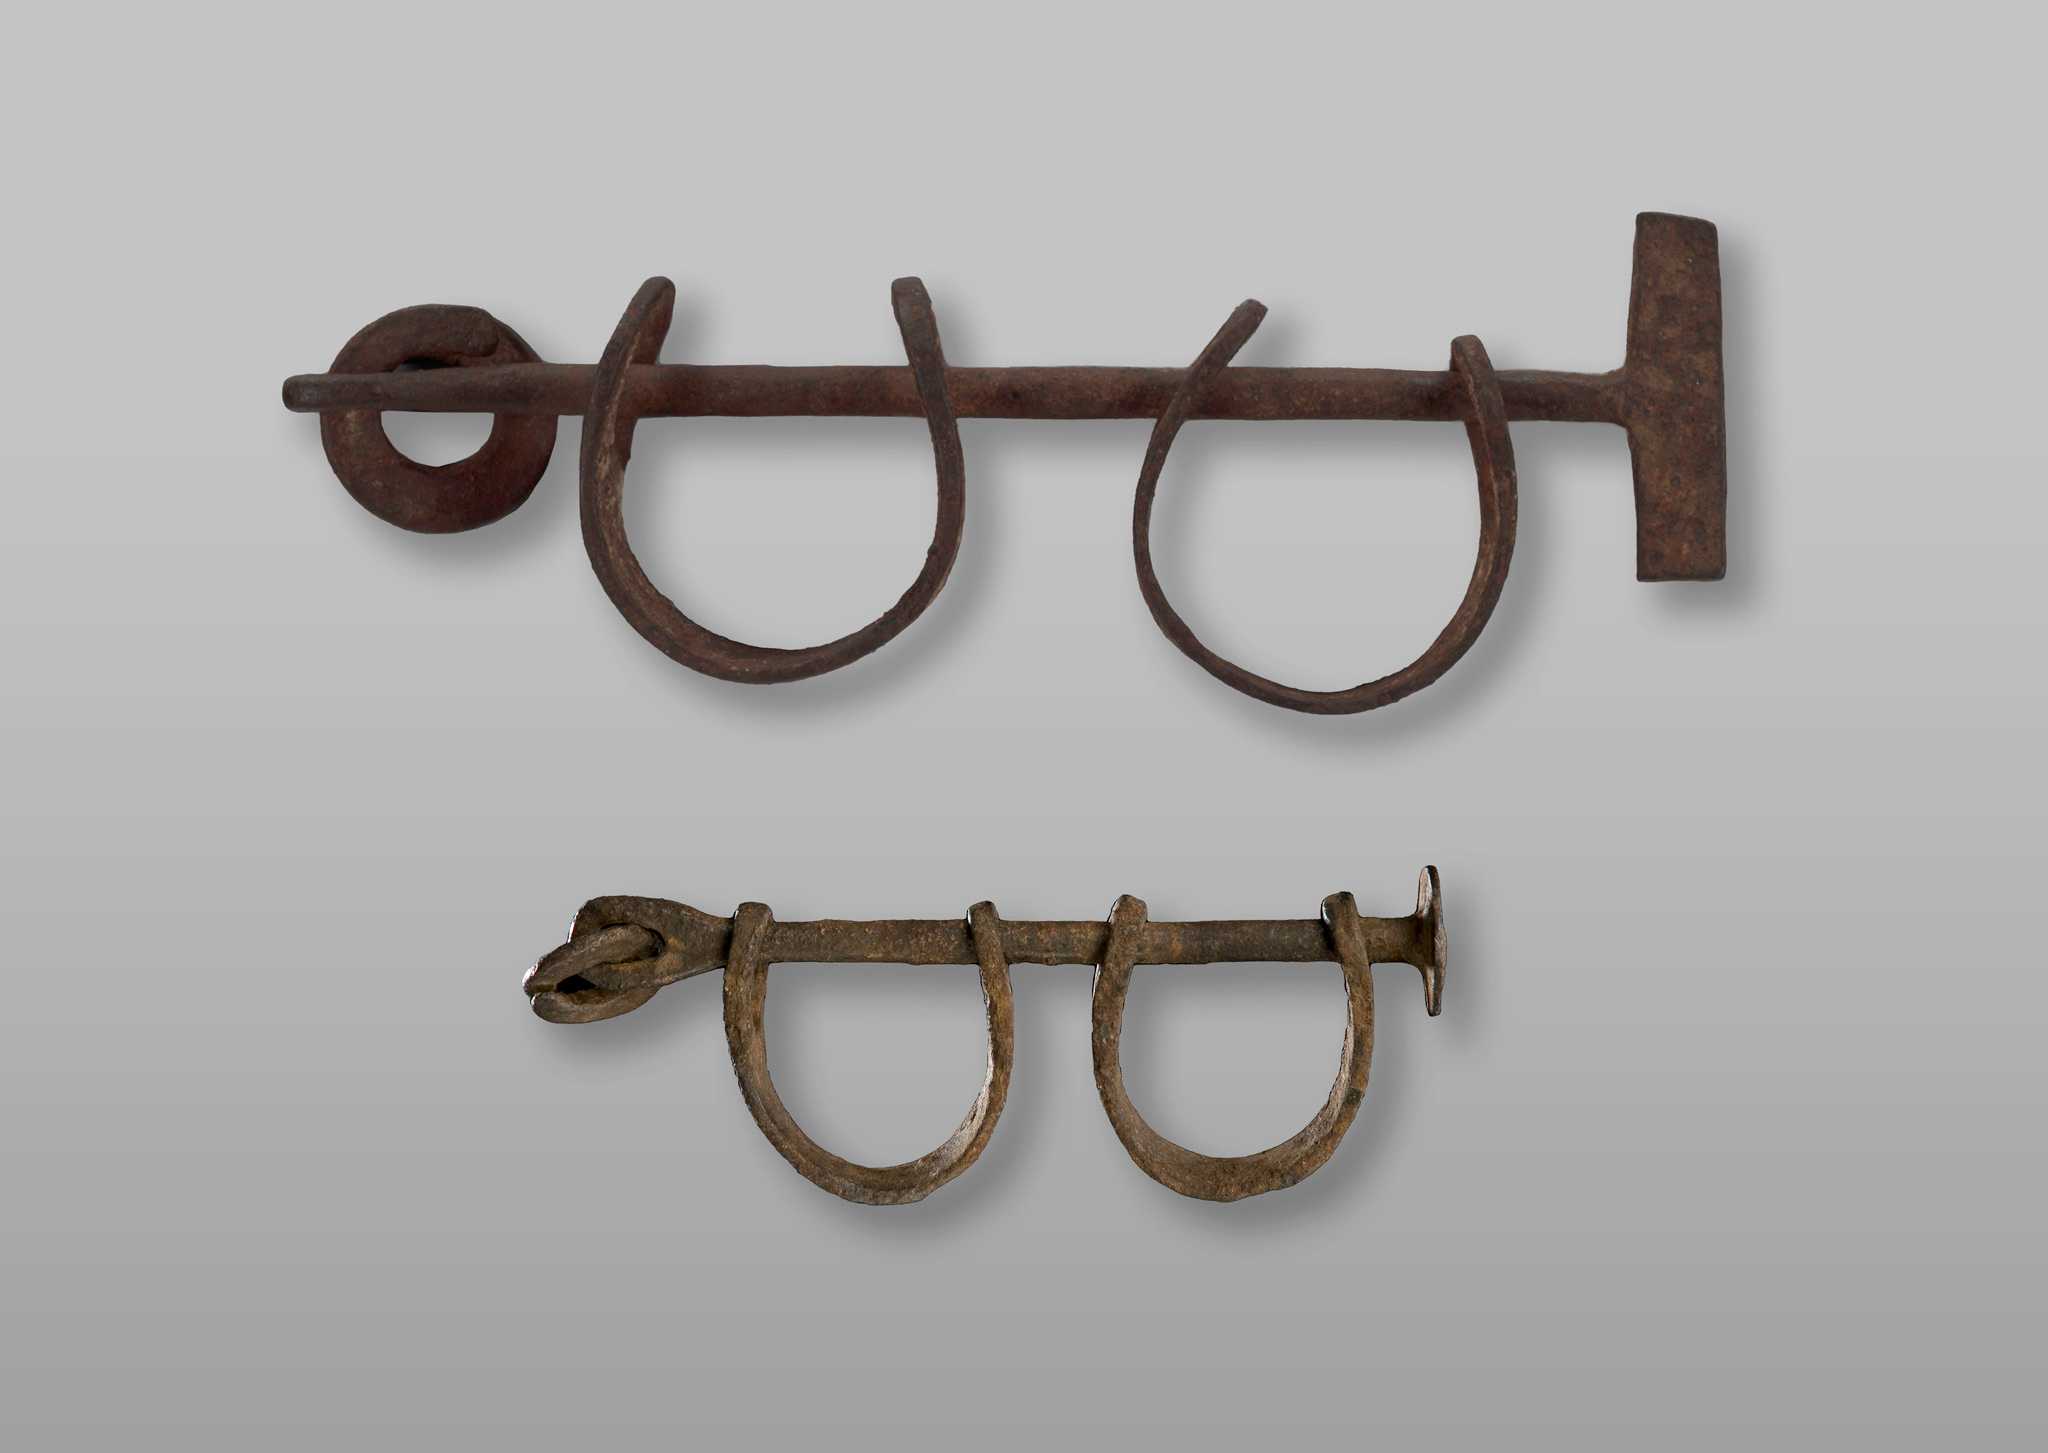 Adult and child shackles photographed in the case